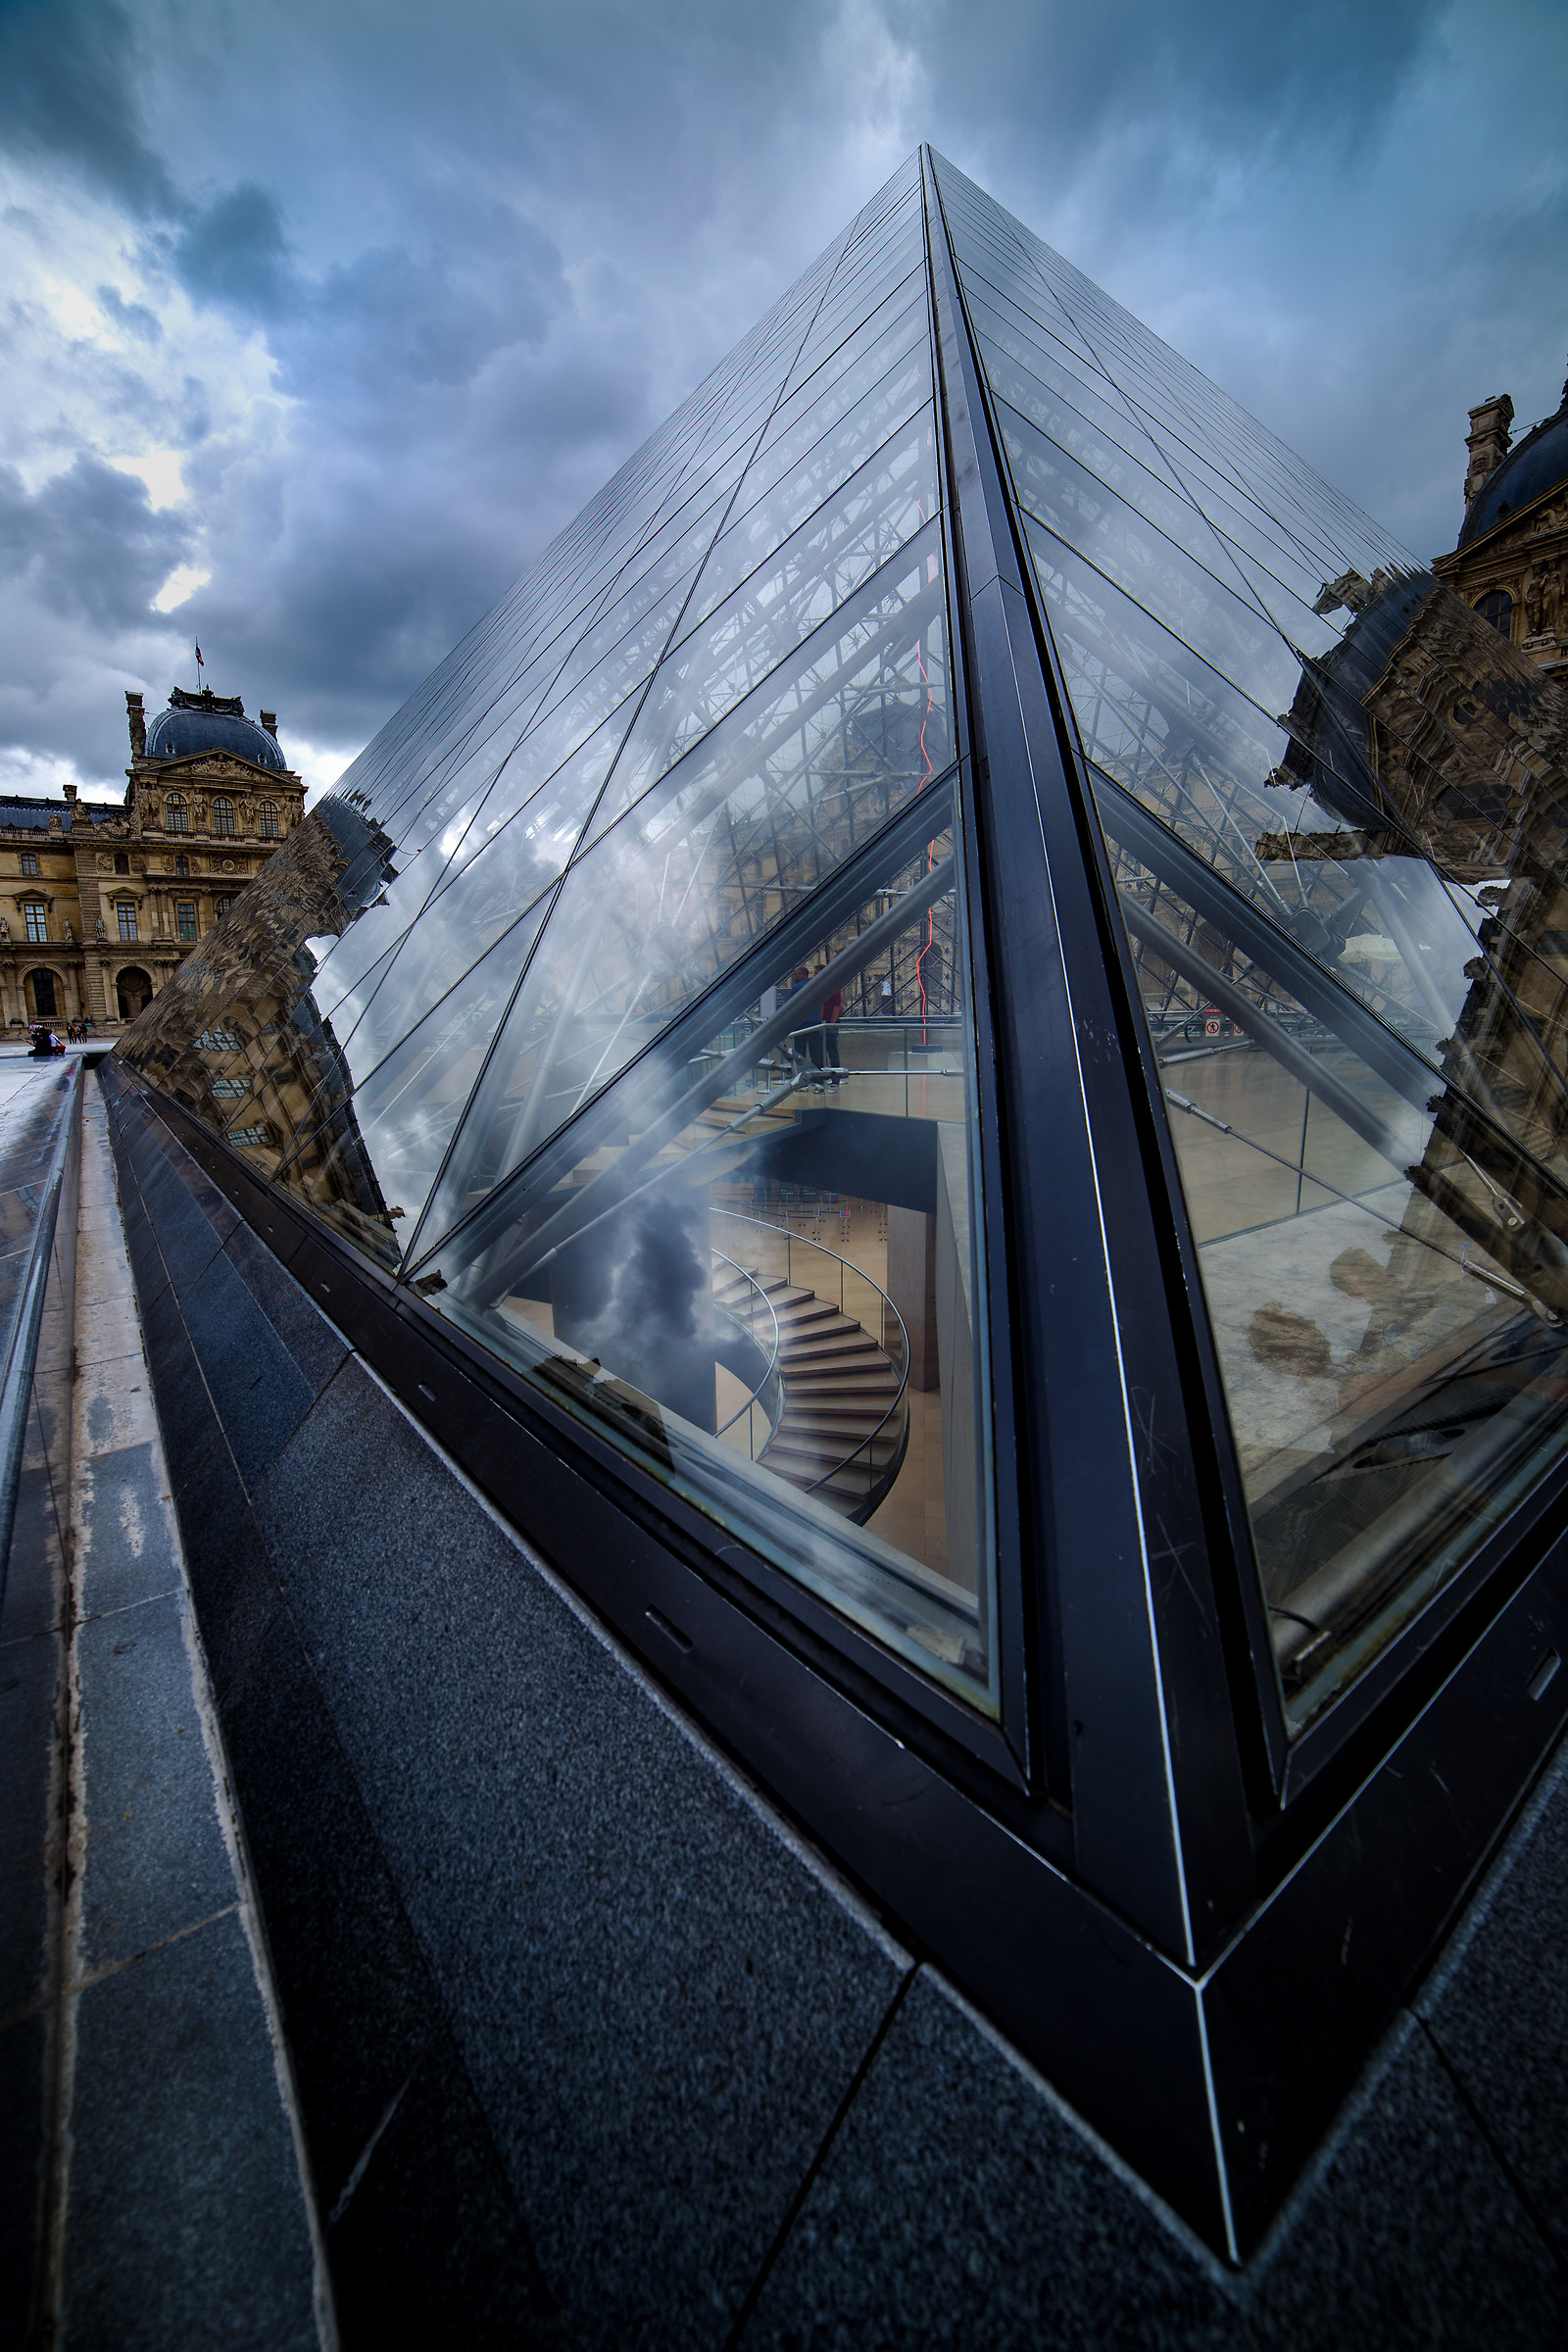 The glass pyramid at the Louvre...